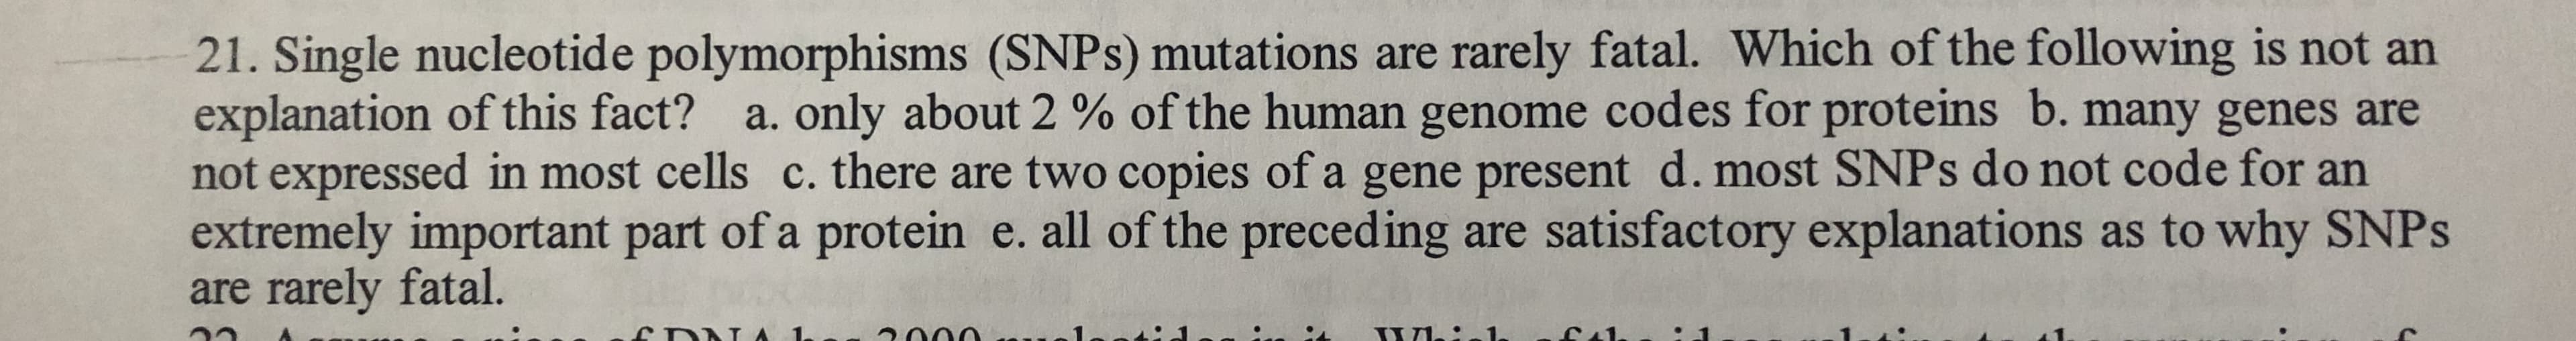 21. Single nucleotide polymorphisms (SNPS) mutations are rarely fatal. Which of the following is not an
explanation of this fact? a. only about 2 % of the human genome codes for proteins b. many genes are
not expressed in most cells c. there are two copies of a gene present d. most SNPS do not code for an
extremely important part of a protein e. all of the preceding are satisfactory explanations as to why SNPS
are rarely fatal.
